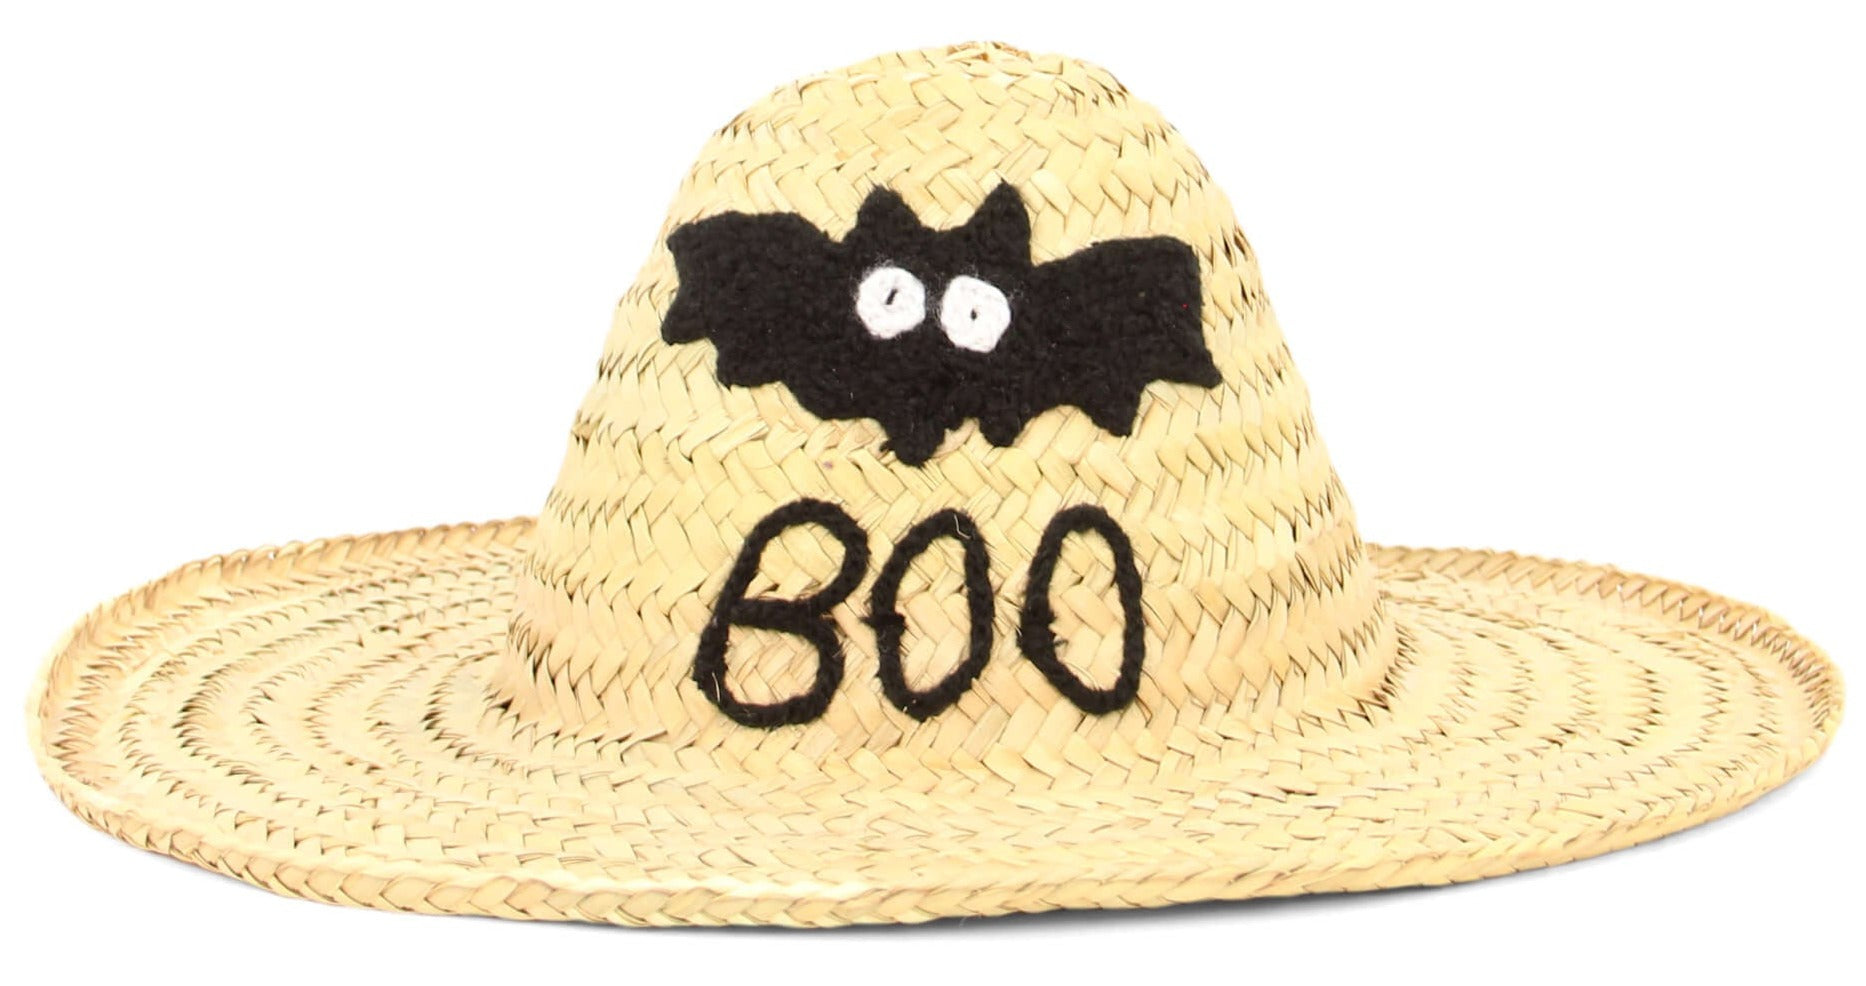 Personalized Witch Hat Wizard magic Hat - Halloween Hats, Witchy Clothing, Pumpkin Hats, Monogram Hats, Halloween Gifts, Straw Hat for Adult - Boo! Pack Of Personalized Halloween Bag & Witch Hat Wizard Magic Hat - Trick Or Treat Bag, Witchy Clothing, Monogram Basket - Halloween Gift